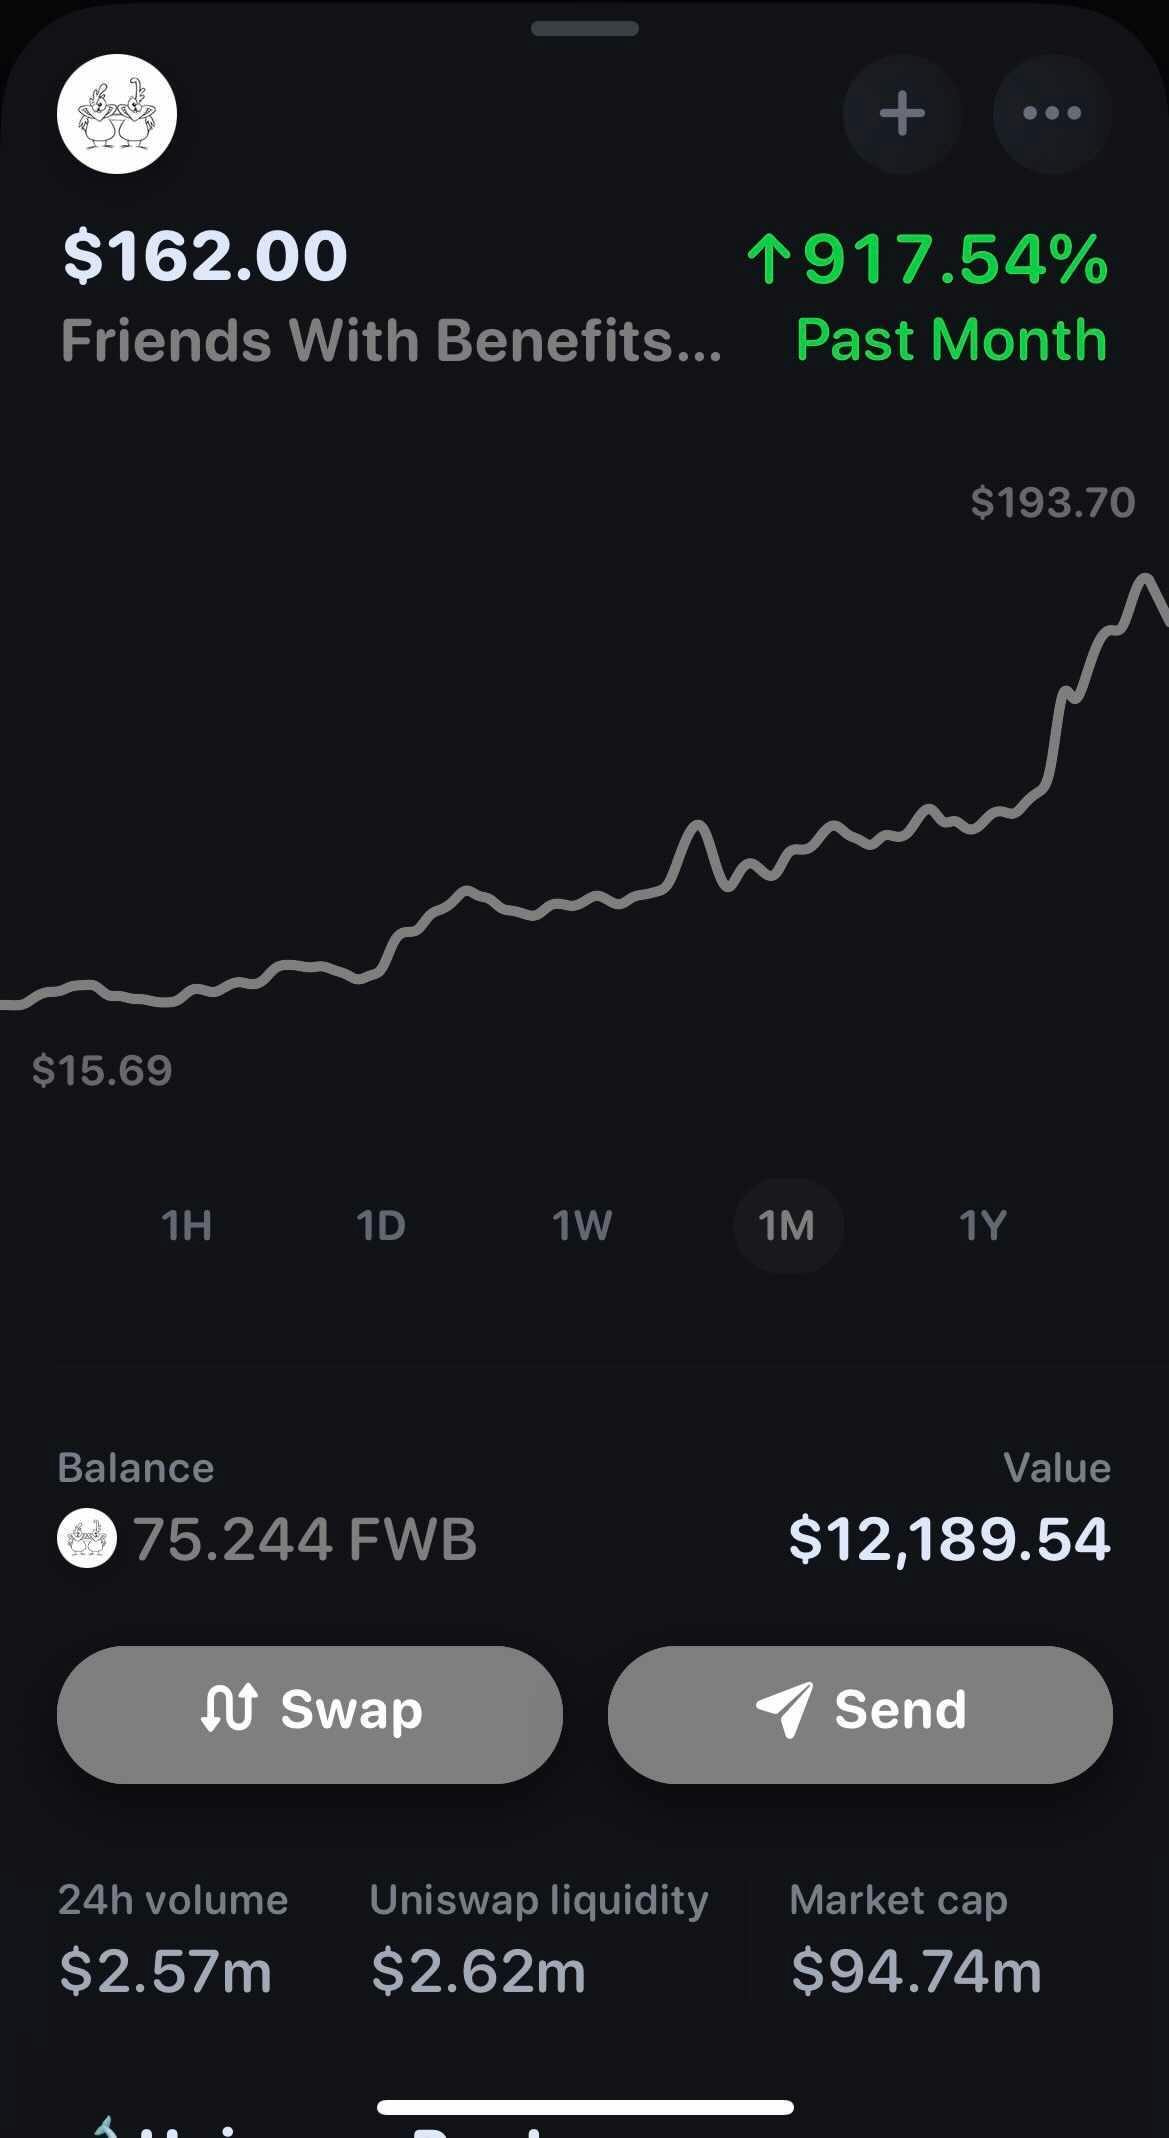 Membership in $FWB went from being worth $1,000 to $12,000 over the past month